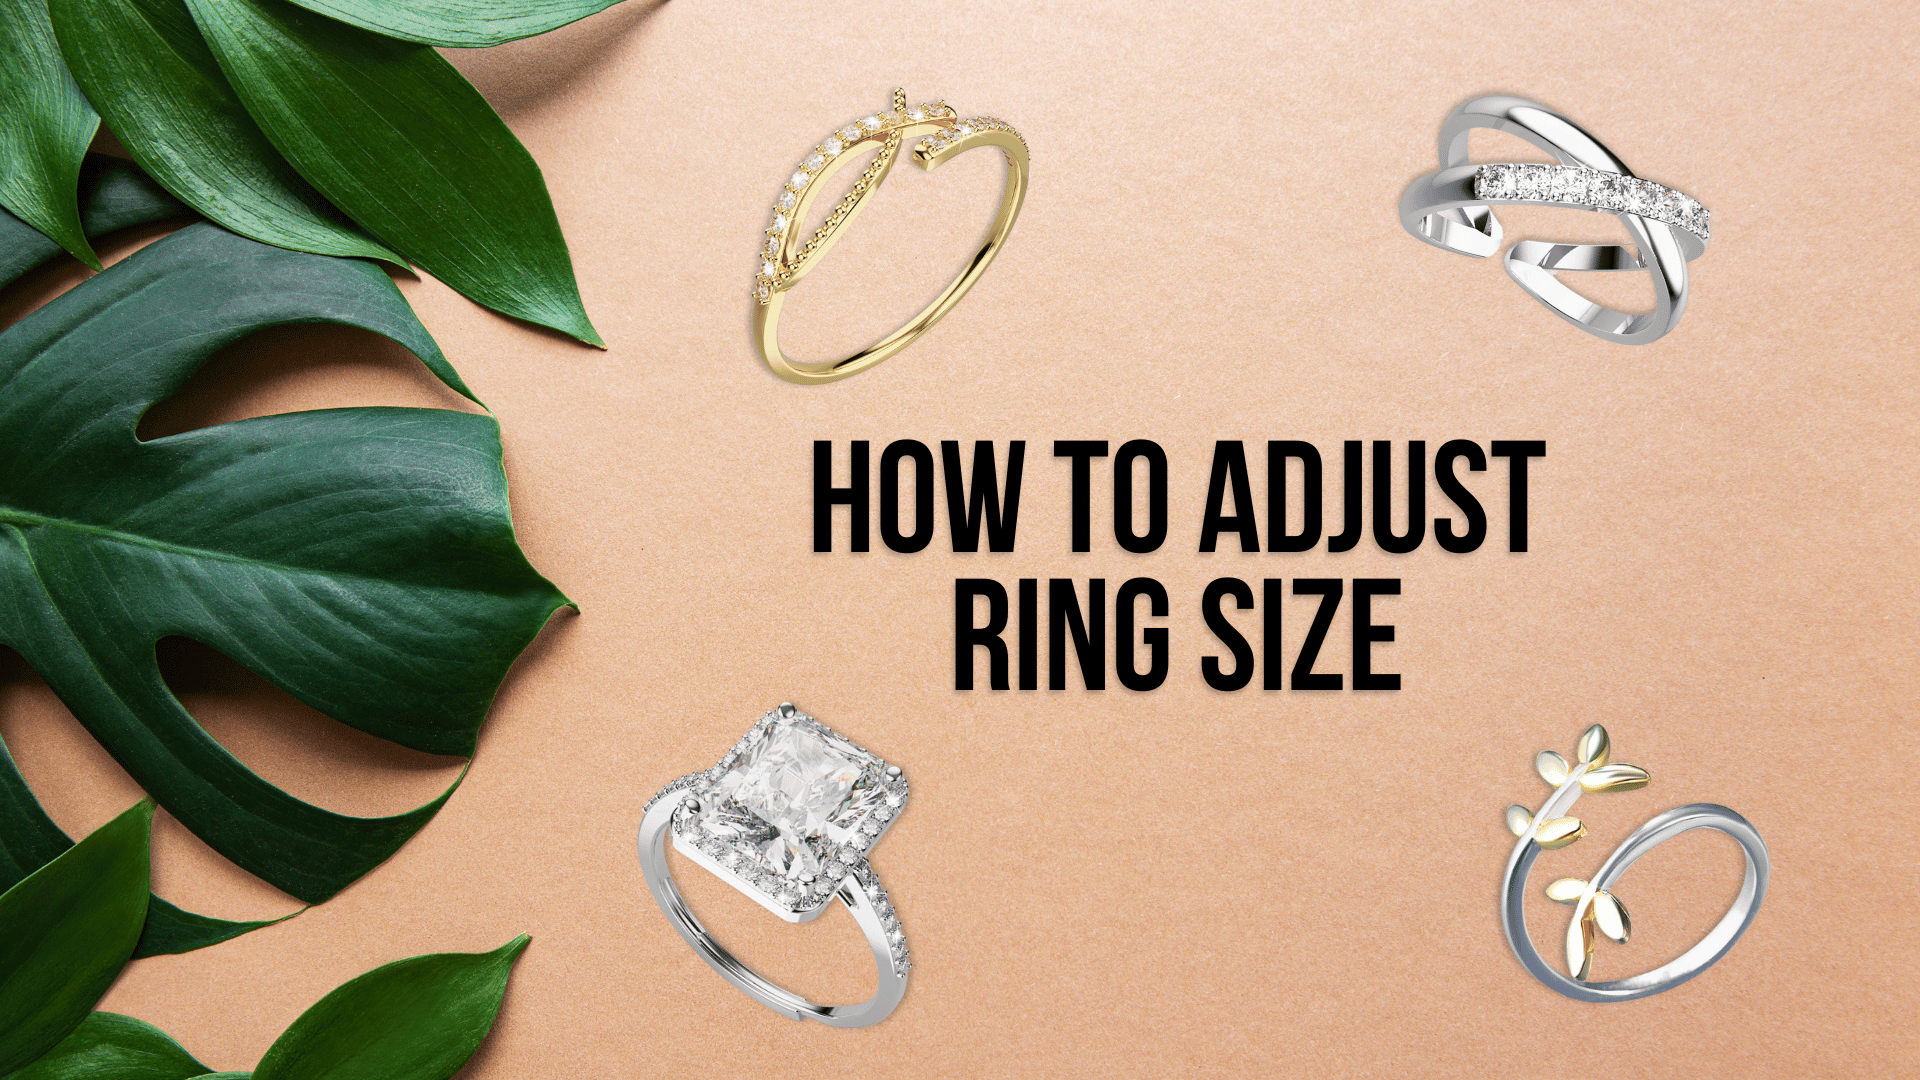 A Complete Guide: How to Adjust Your Ring Size Safely